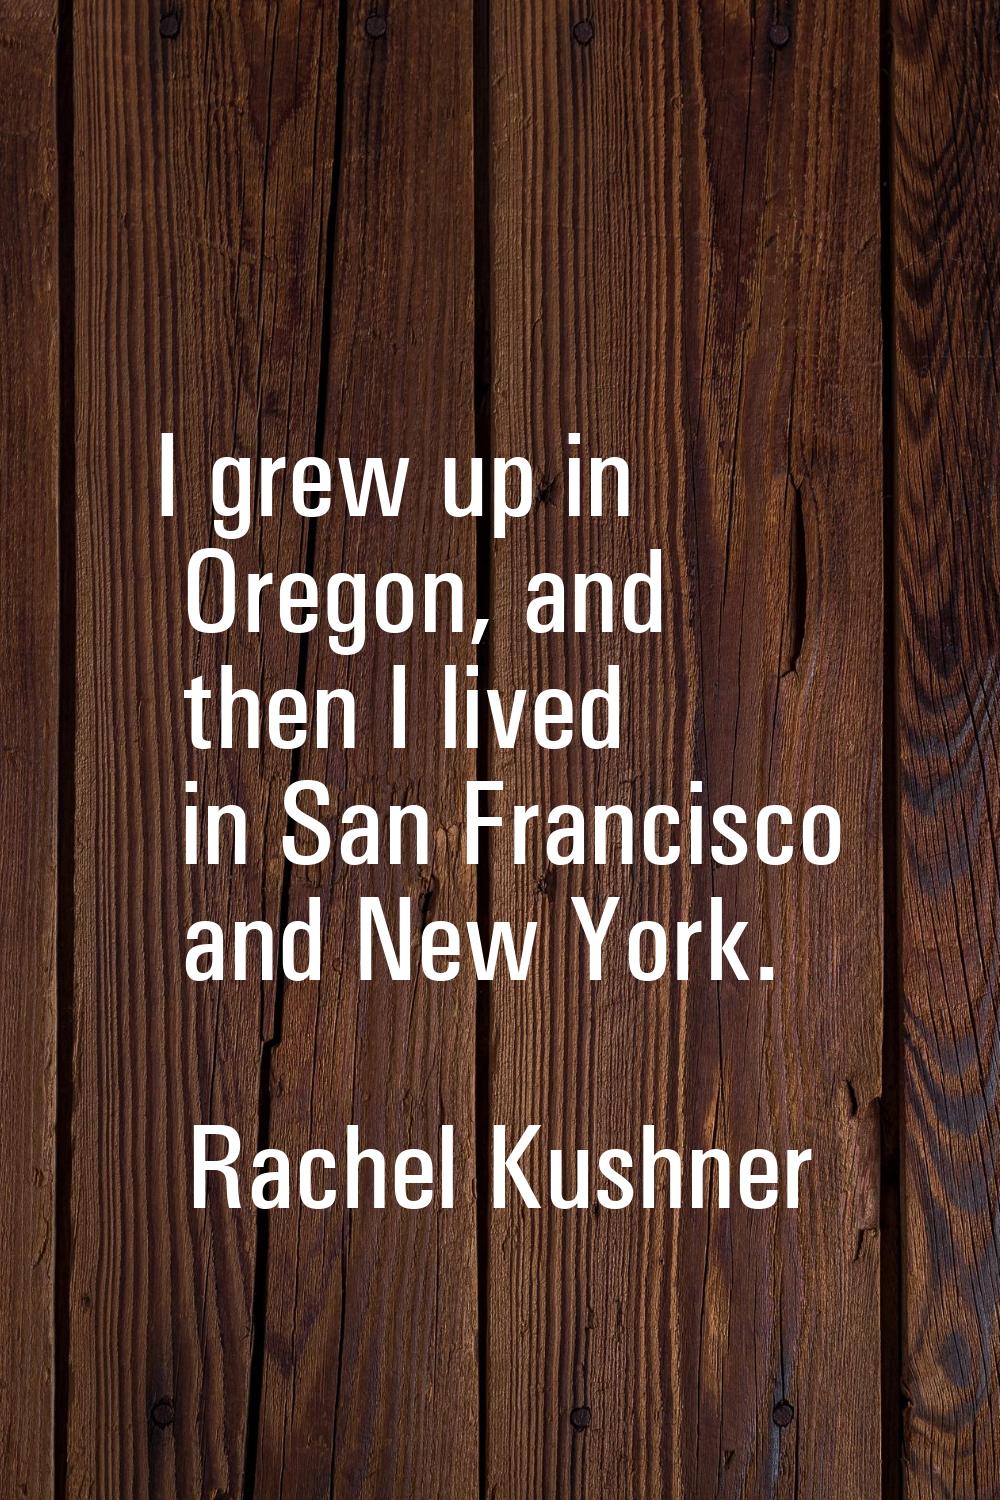 I grew up in Oregon, and then I lived in San Francisco and New York.